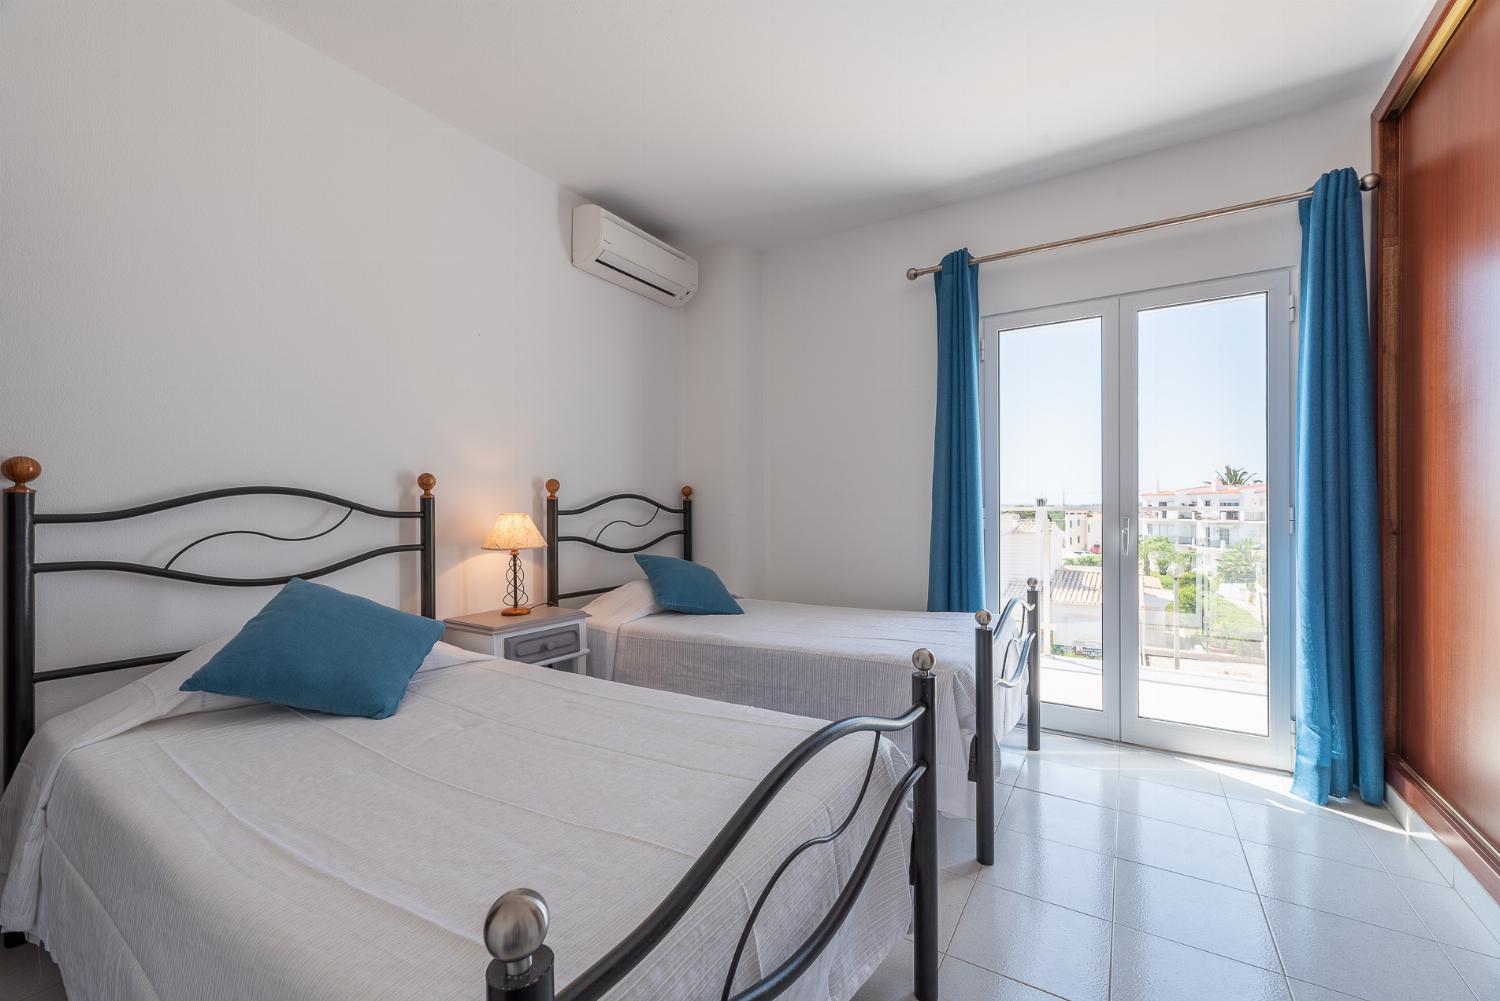 Twin bedroom with A/C and open access to the terrace